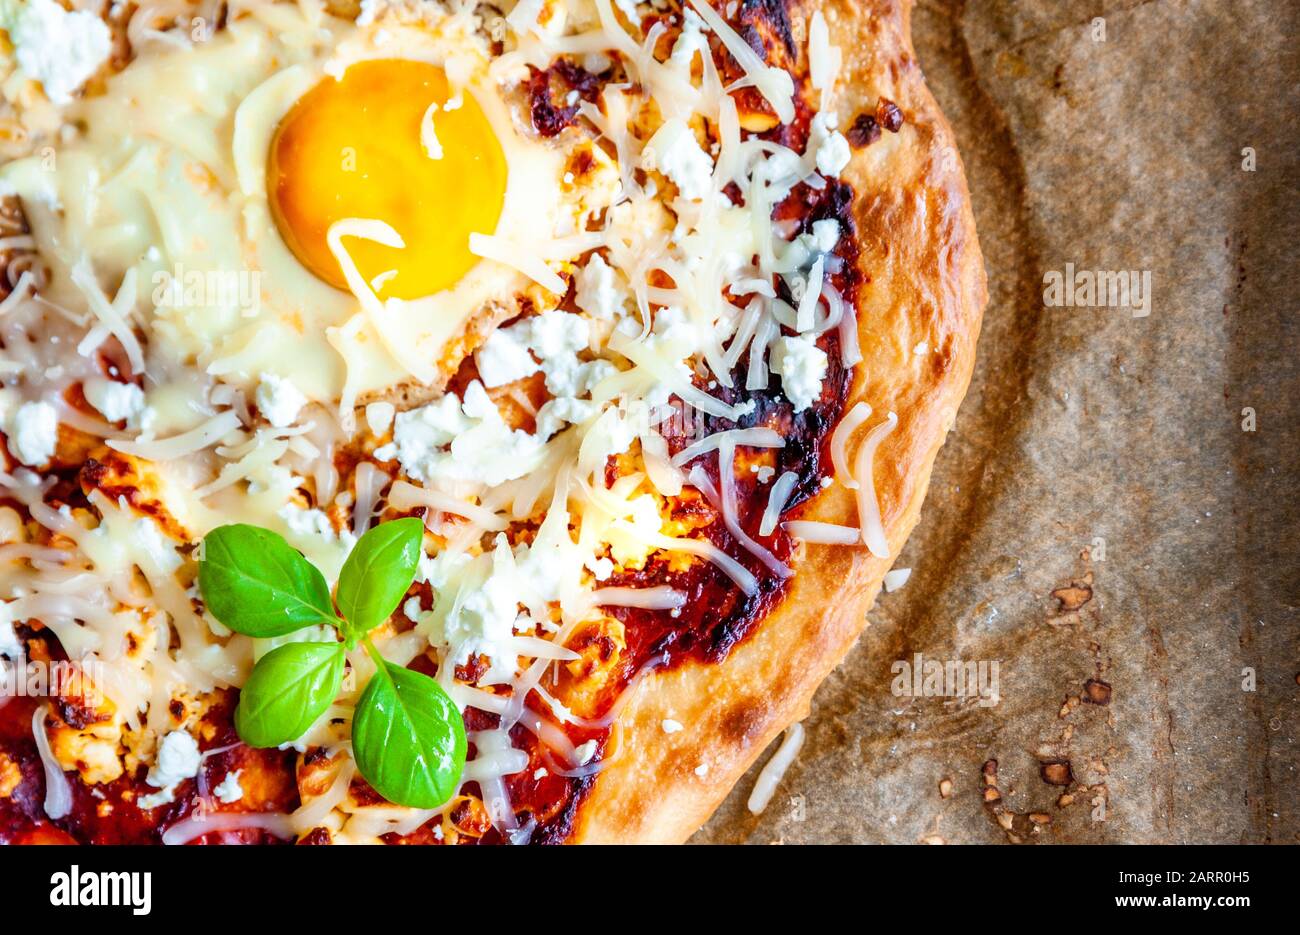 Detail shot of a pizza with egg, cheese and herbs. Rustic scene and dramatic light. Stock Photo